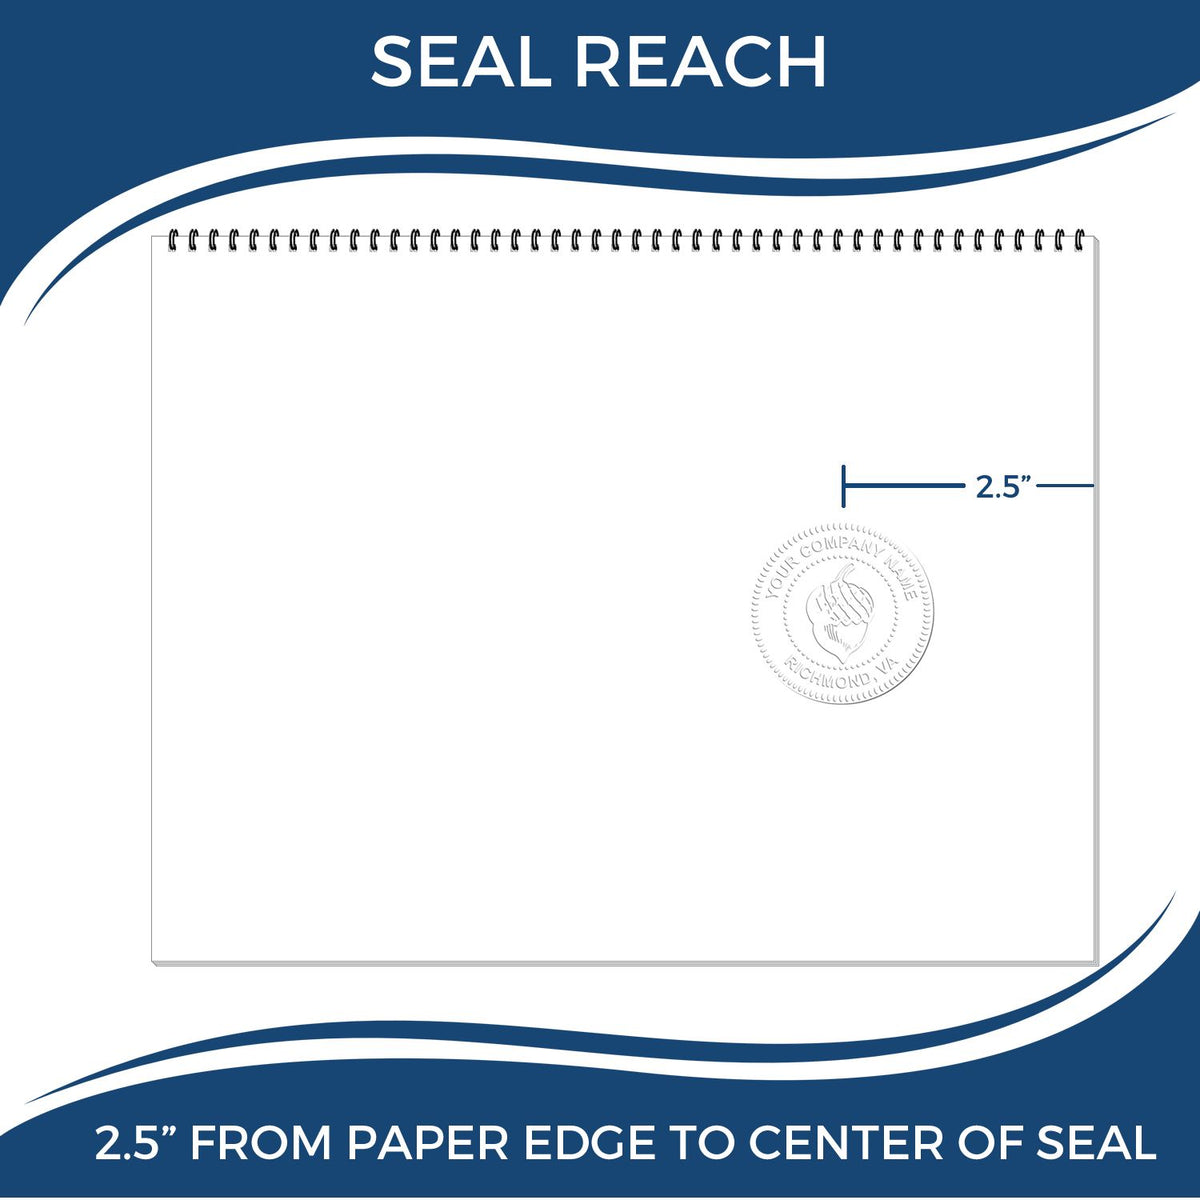 An infographic showing the seal reach which is represented by a ruler and a miniature seal image of the Long Reach New York Geology Seal